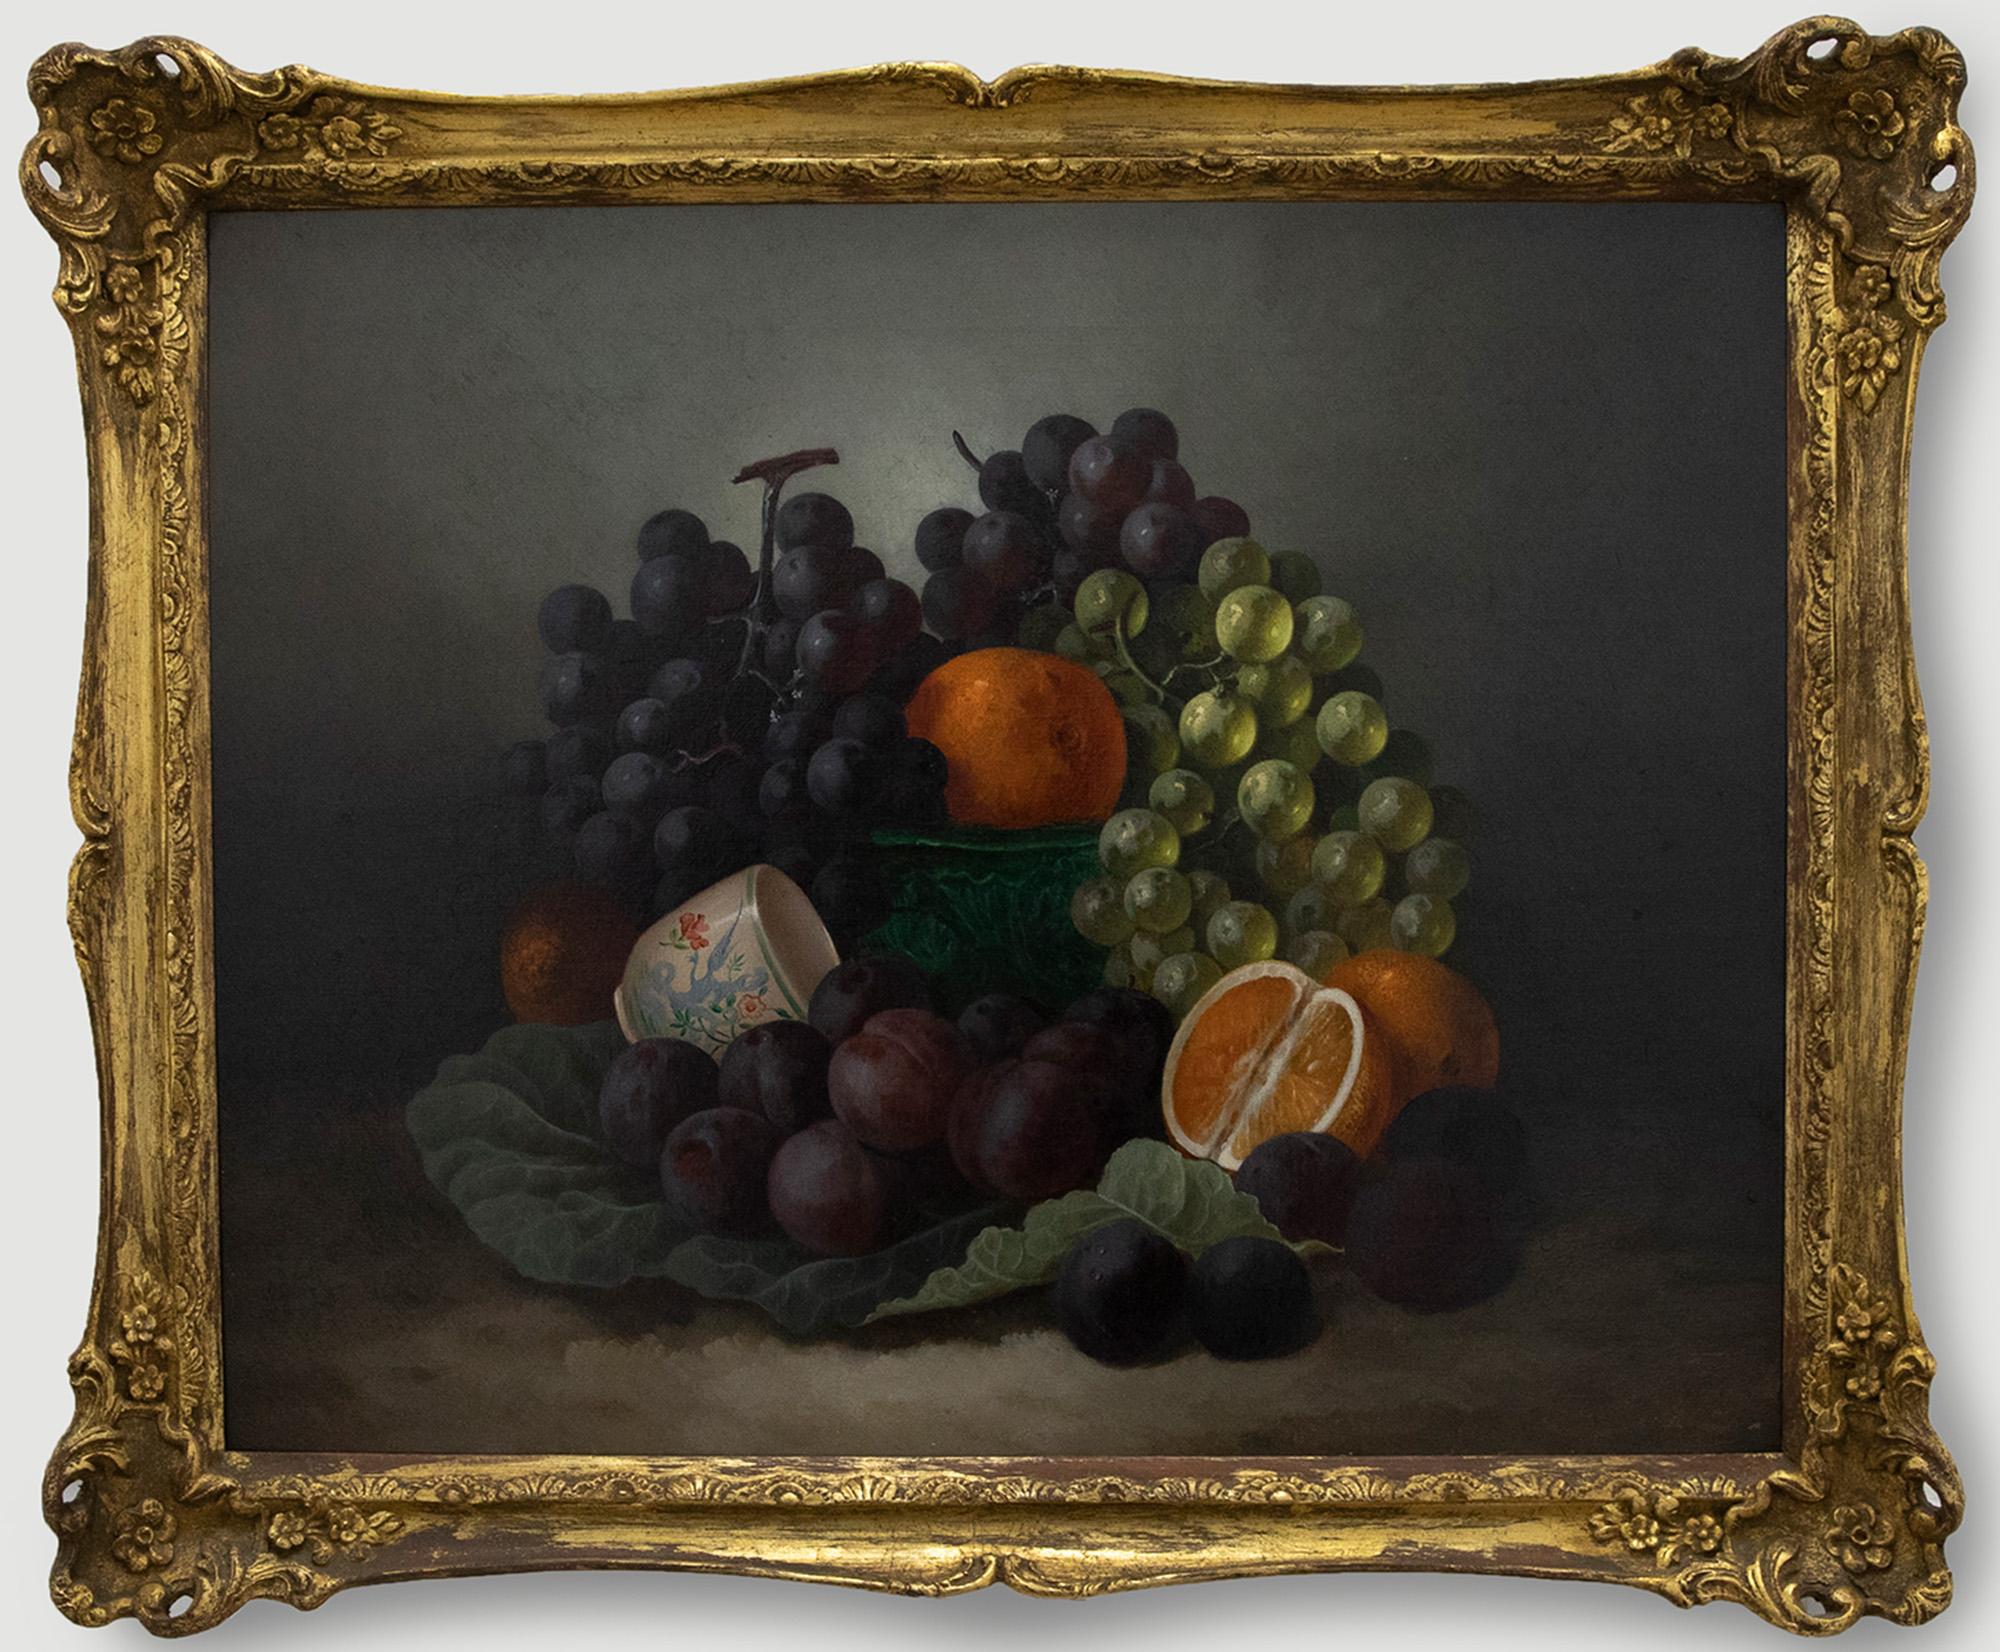 A finely painted oil still life of soft fruits, by the popular British artist George Crisp (1875-1916). The scene depicts a sumptuous display of oranges, plums and grapes, encompassed in a cabbage leaf and Wedgewood bowl. The oil has been signed by